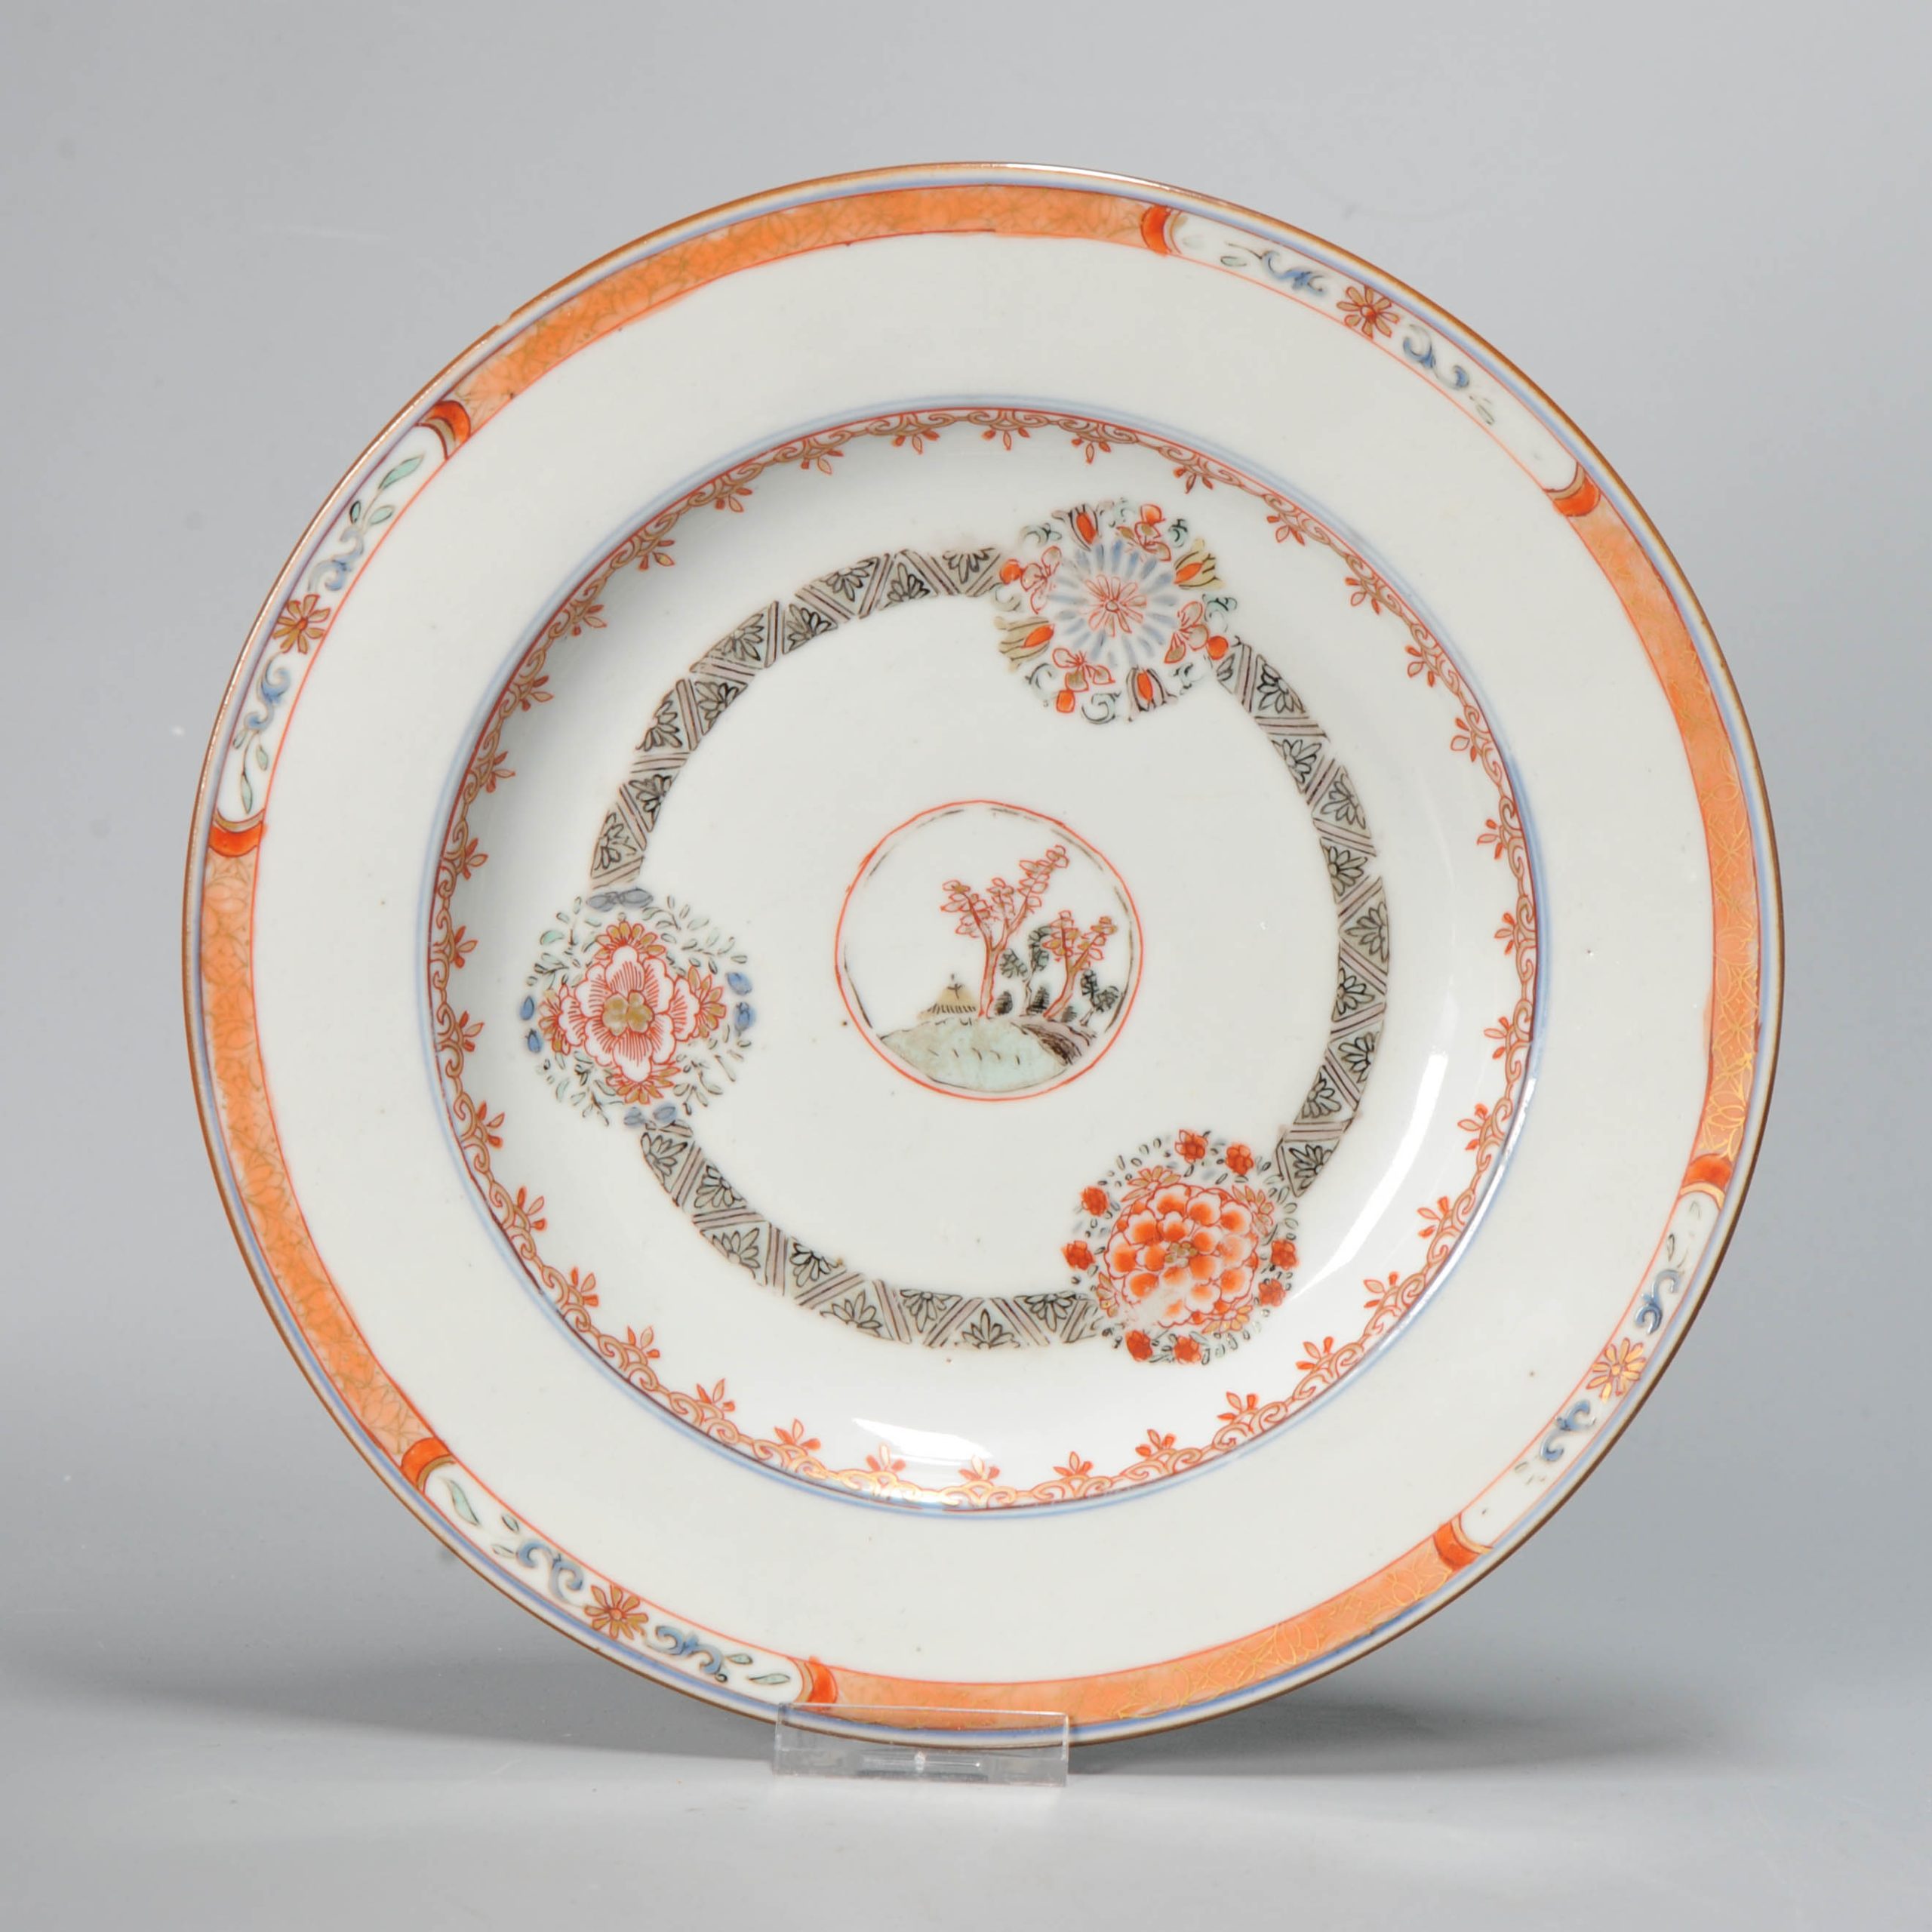 0988 A nice Kangxi plate with medallions, unmarked Famille Verte style